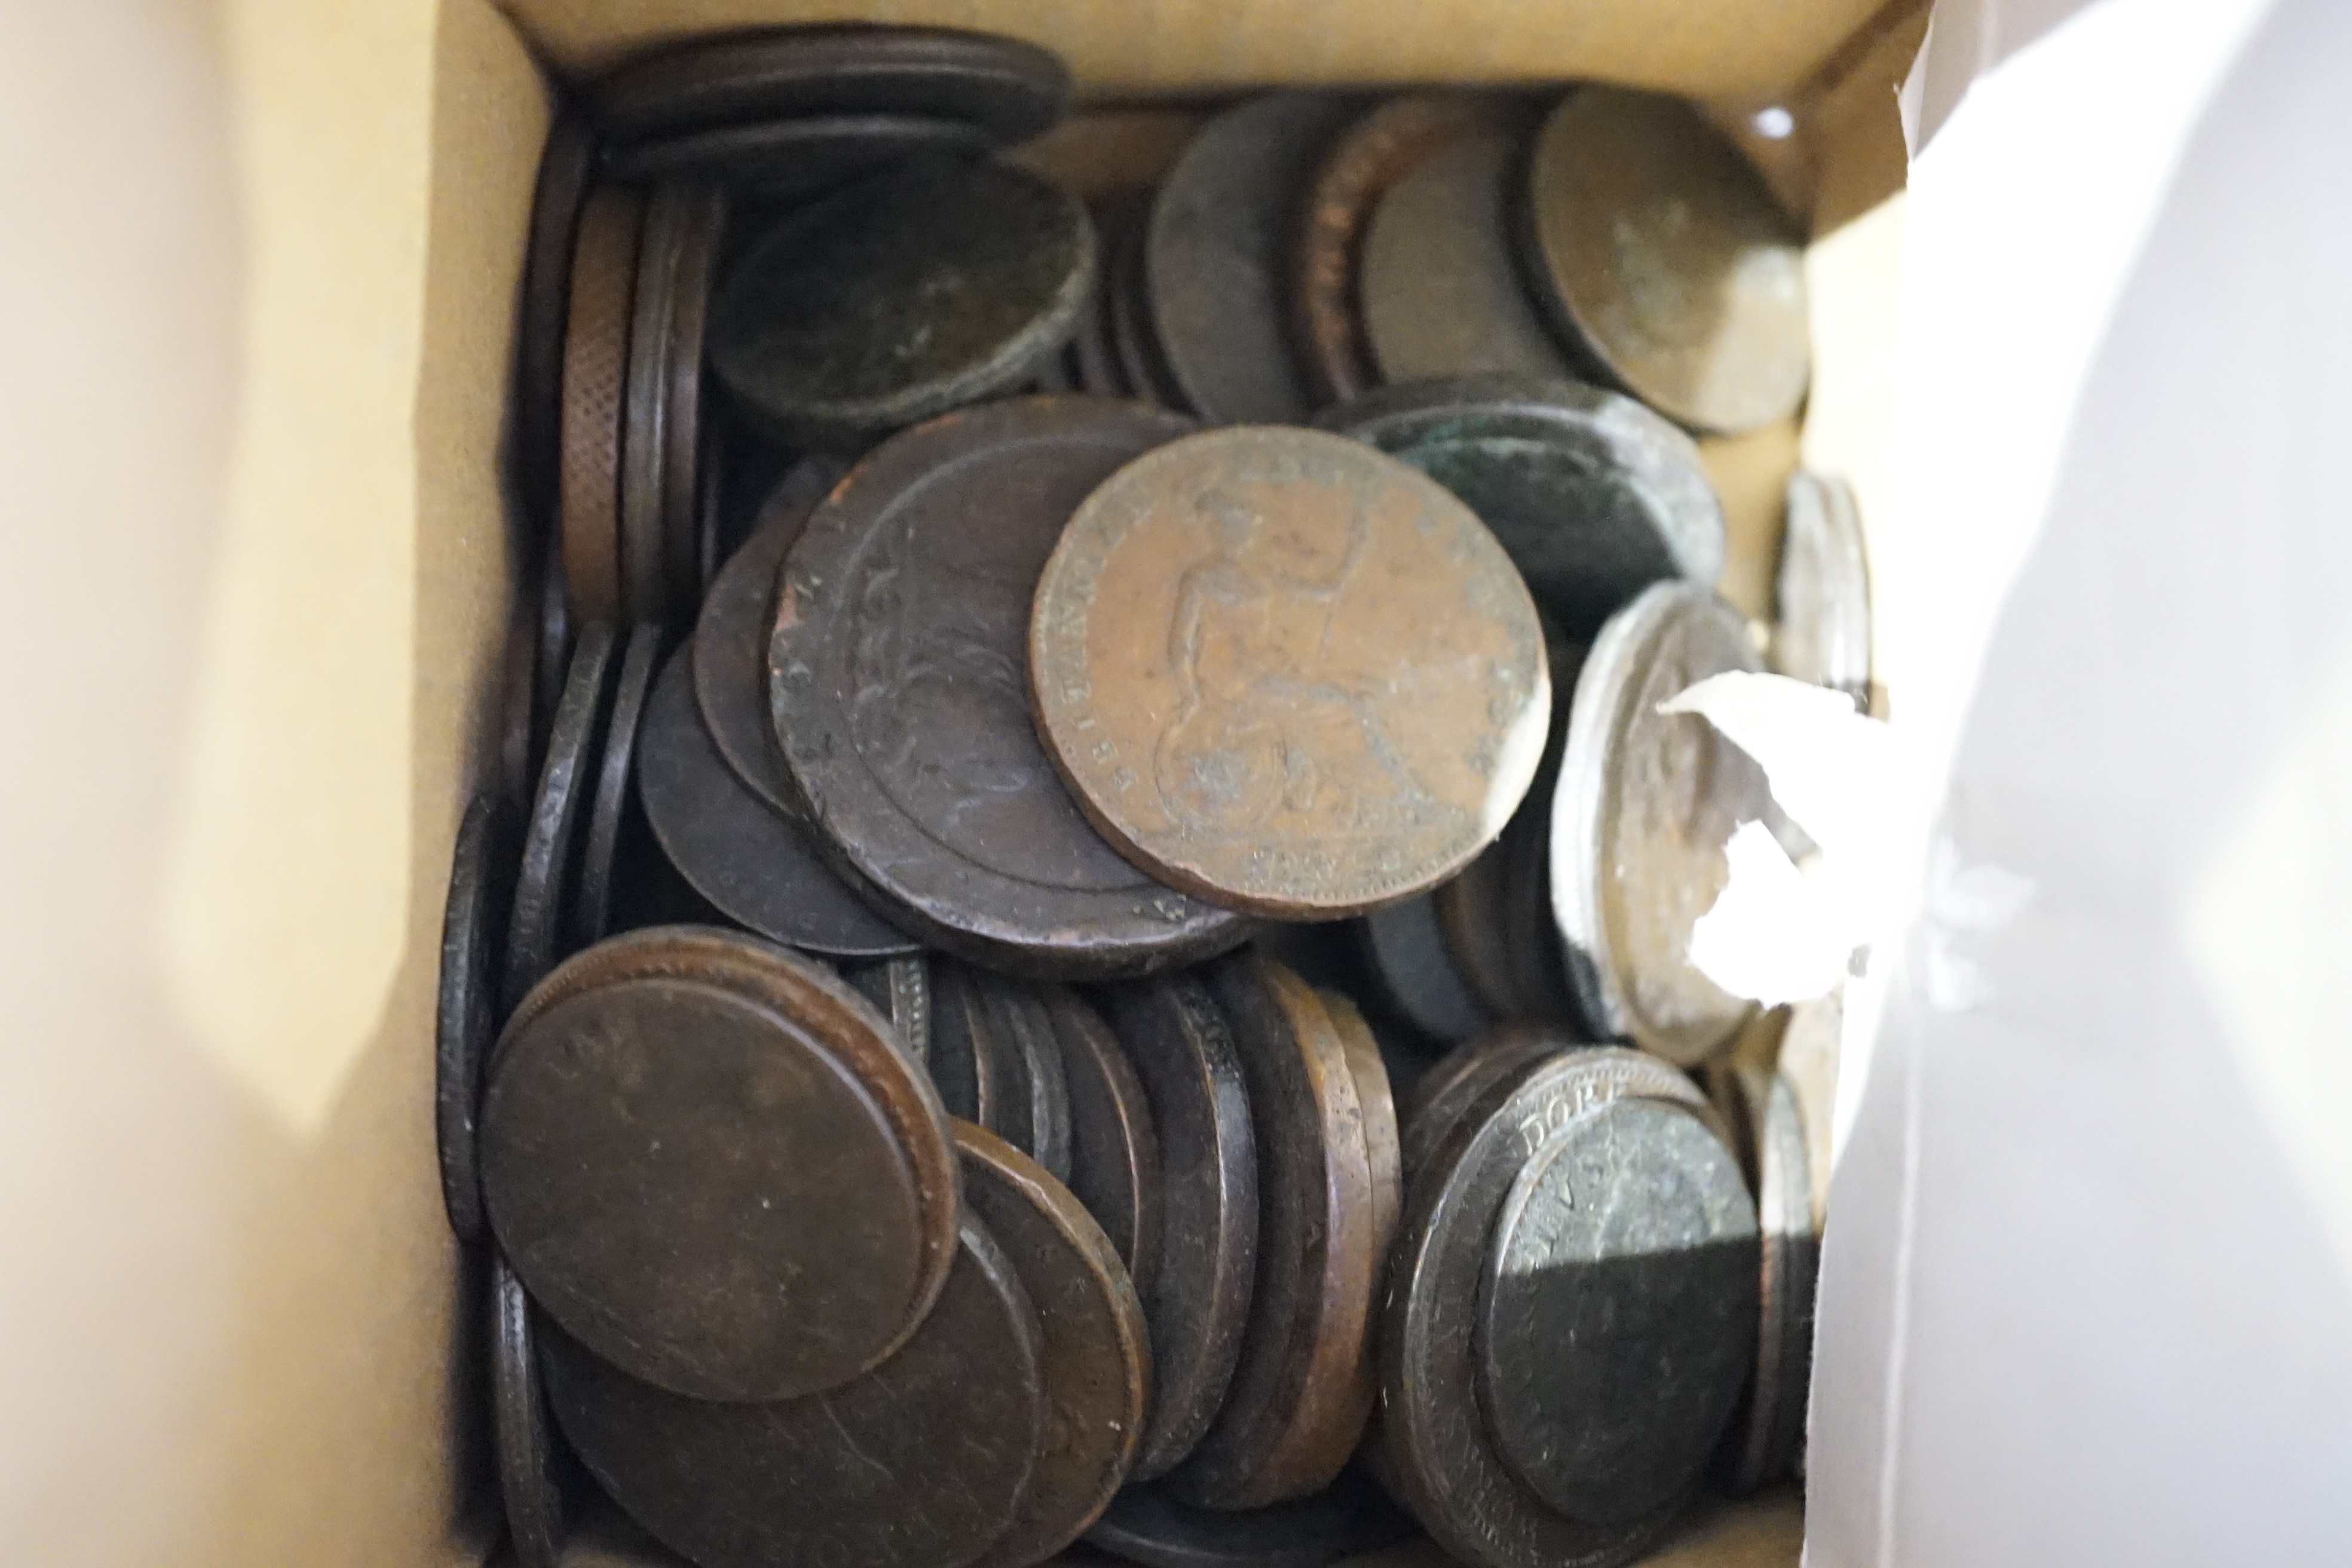 British coins, George III to Elizabeth II, a large quantity of loose coins, including George III copper coins such as 1797 Soho twopence, the majority pre-decimal ranging from two shillings to pennies including pre 1947